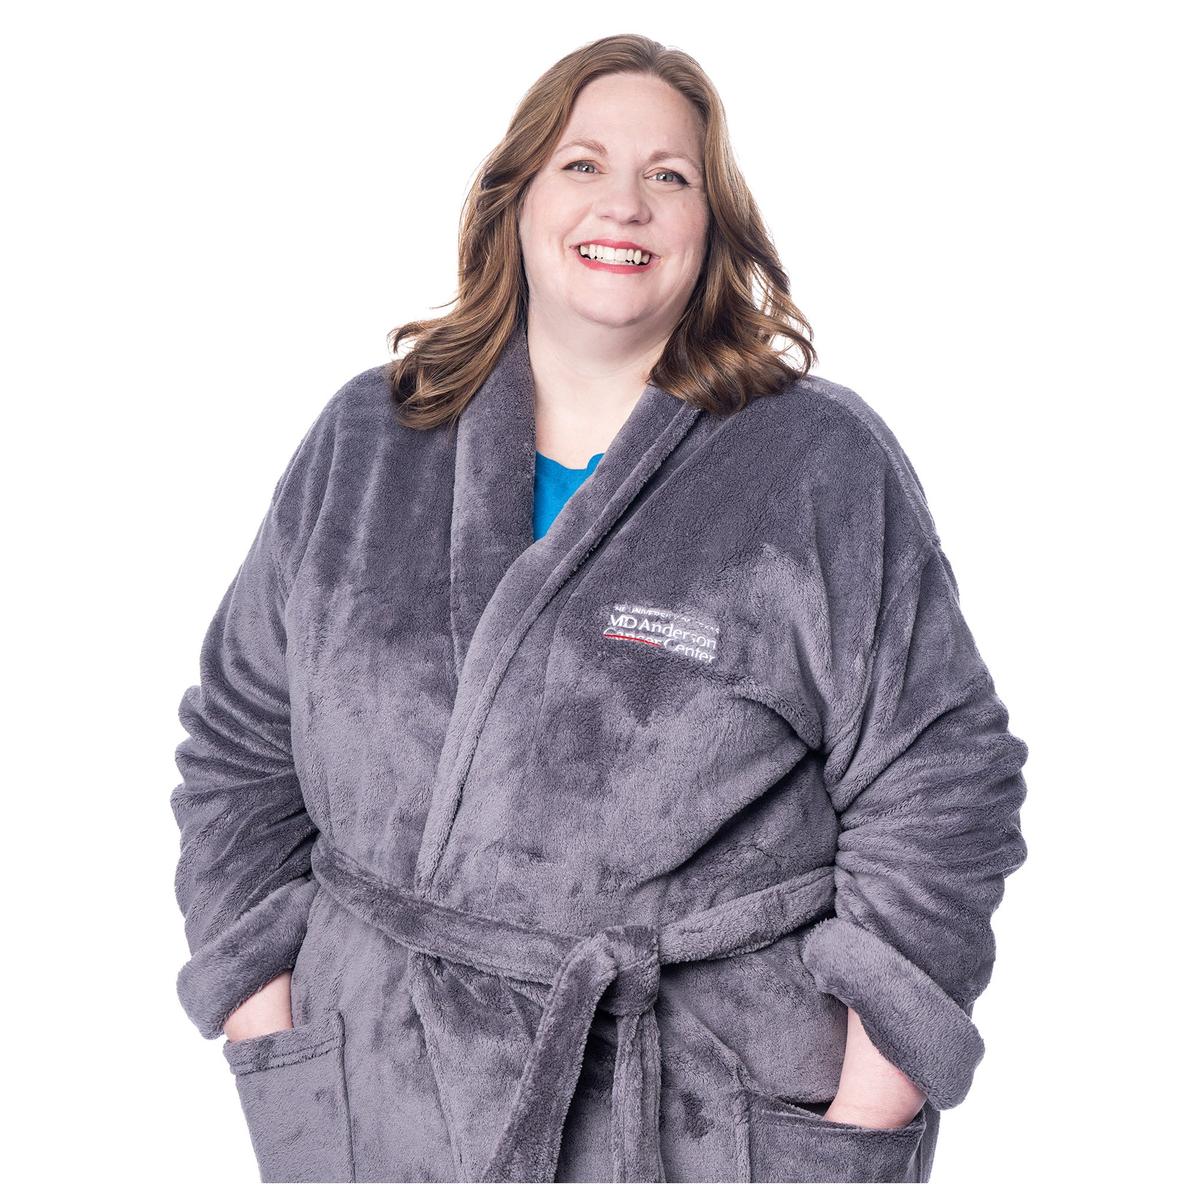 Closeup of MD Anderson employee wearing a gray plush robe with belt featuring the white MD Anderson logo on the chest area.